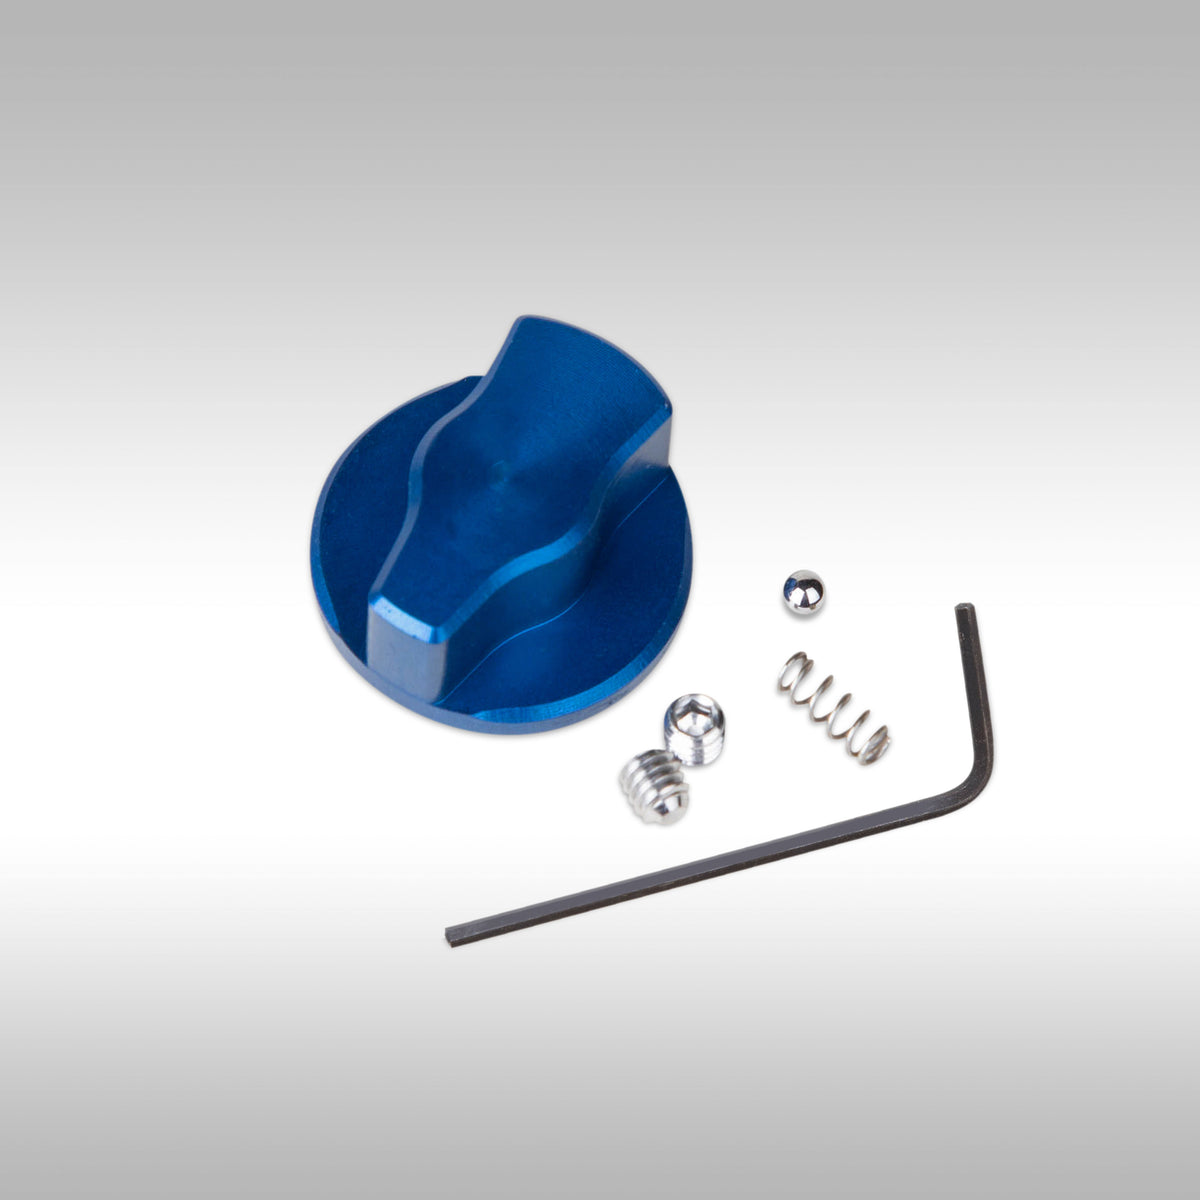 MSC - ADJUSTER KNOB FOR RM3, AXIS &amp; VECTORMX DAMPERS